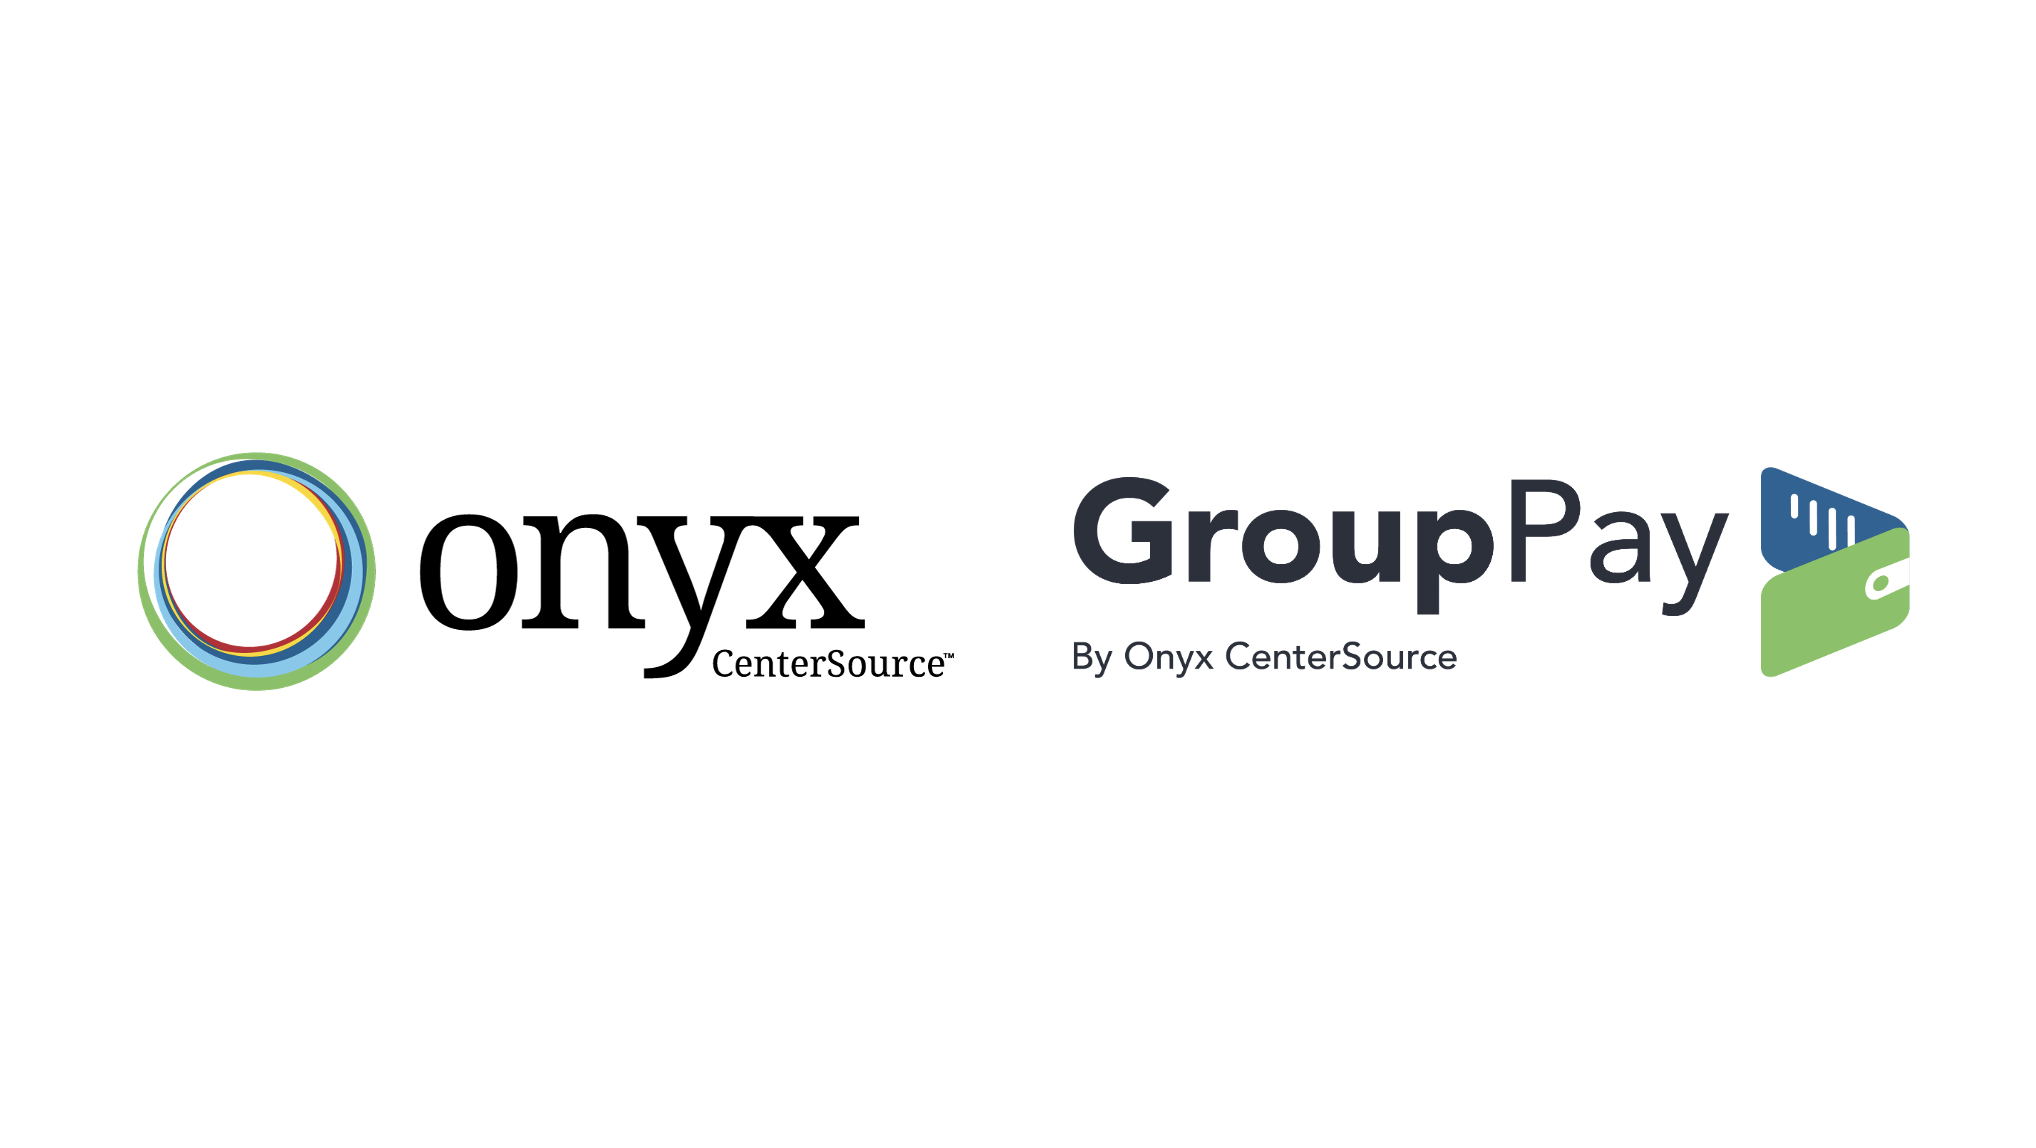 ONYX CenterSource